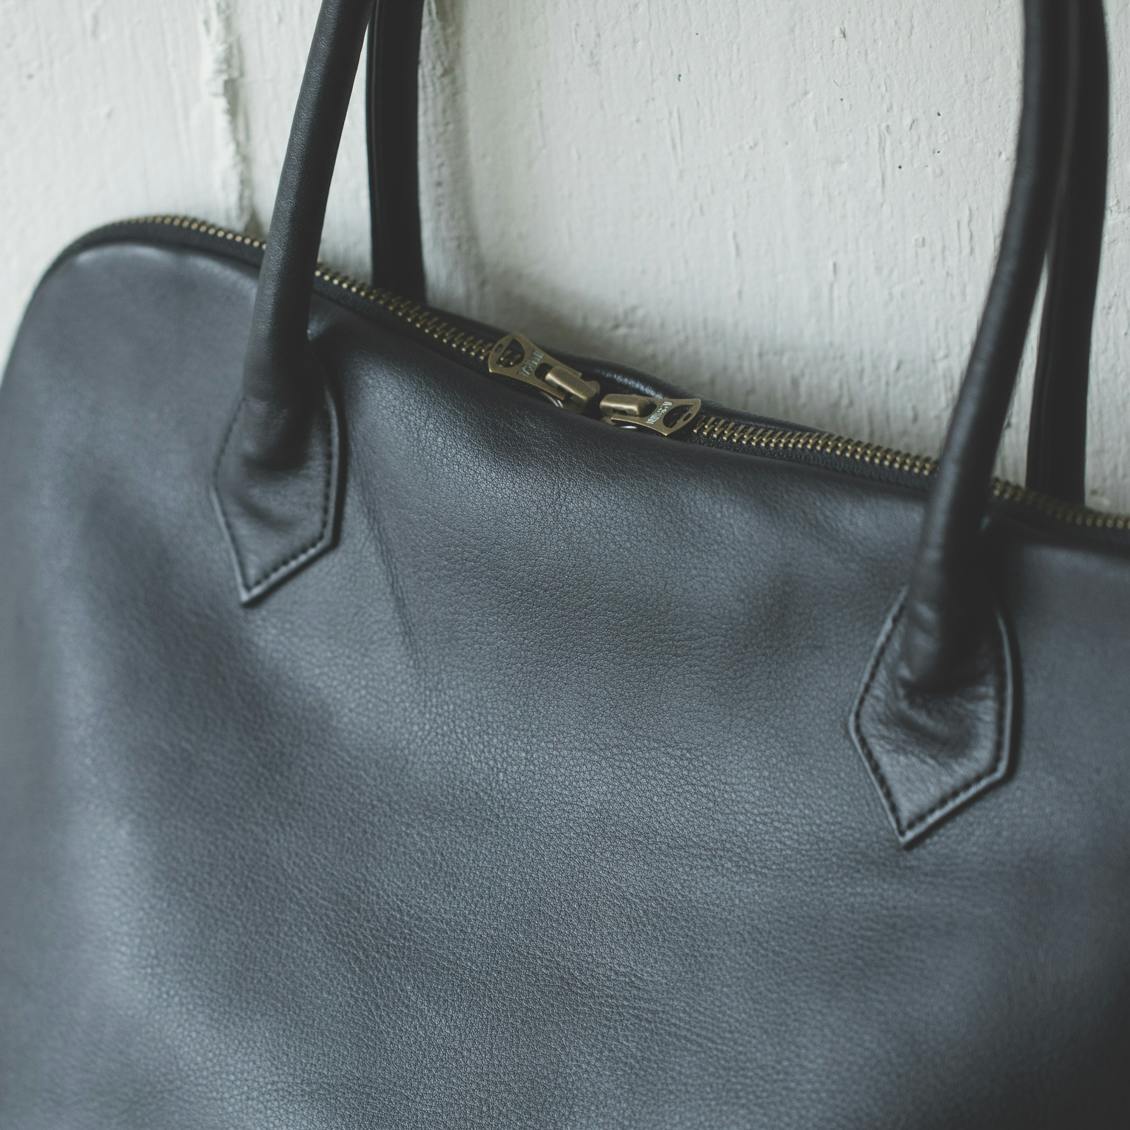 CLASKA & THE FACTORY / レザートートバッグ / Silva Tote Bag Leather ...